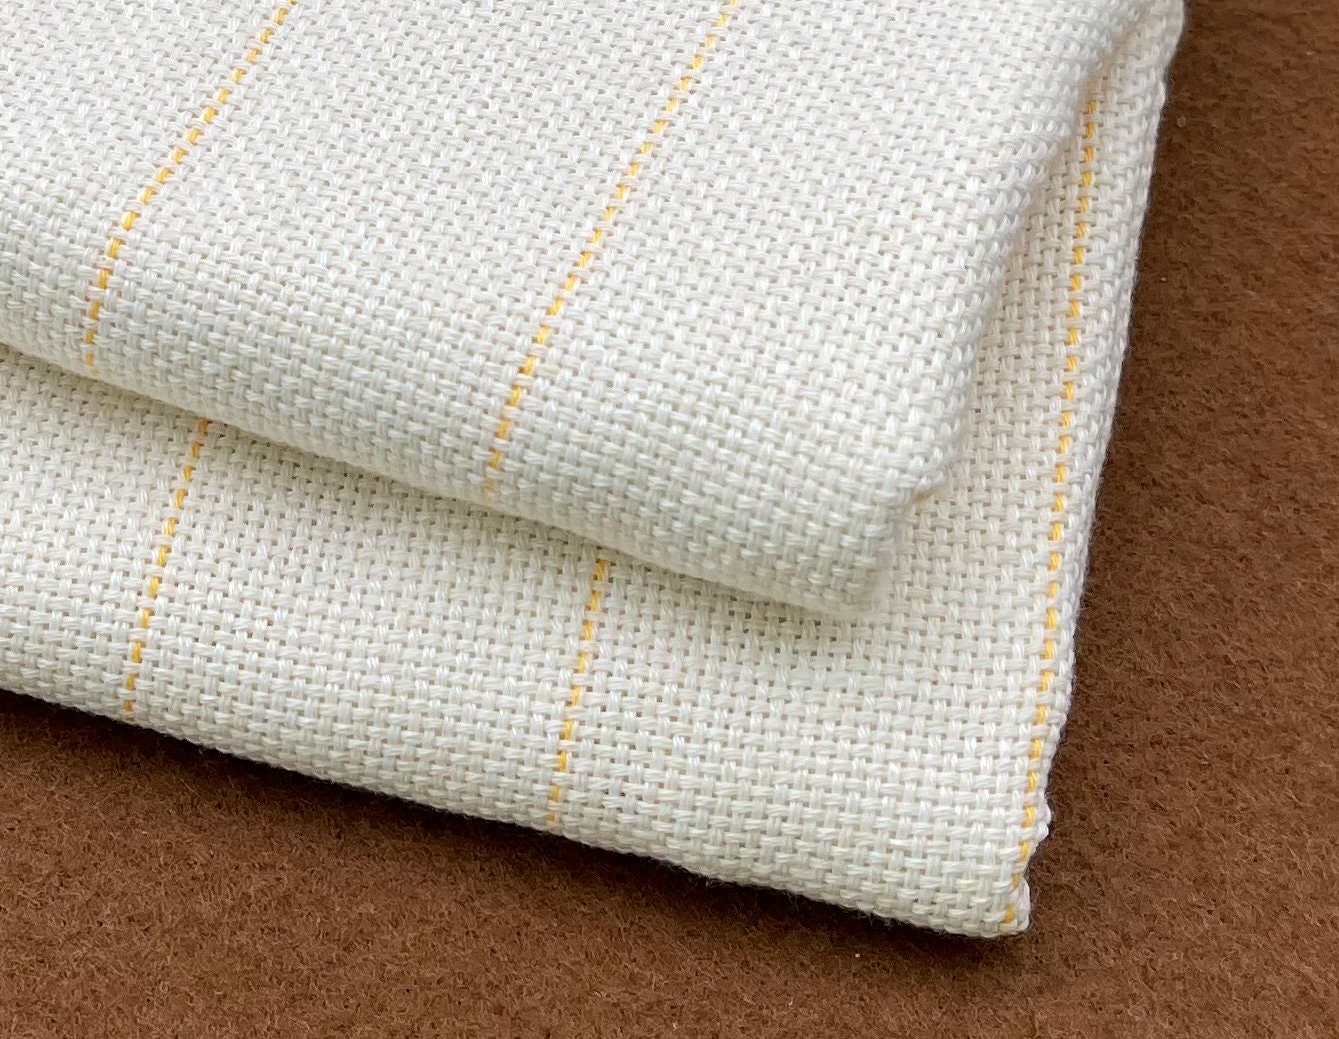 Primary Tufting Cloth - White